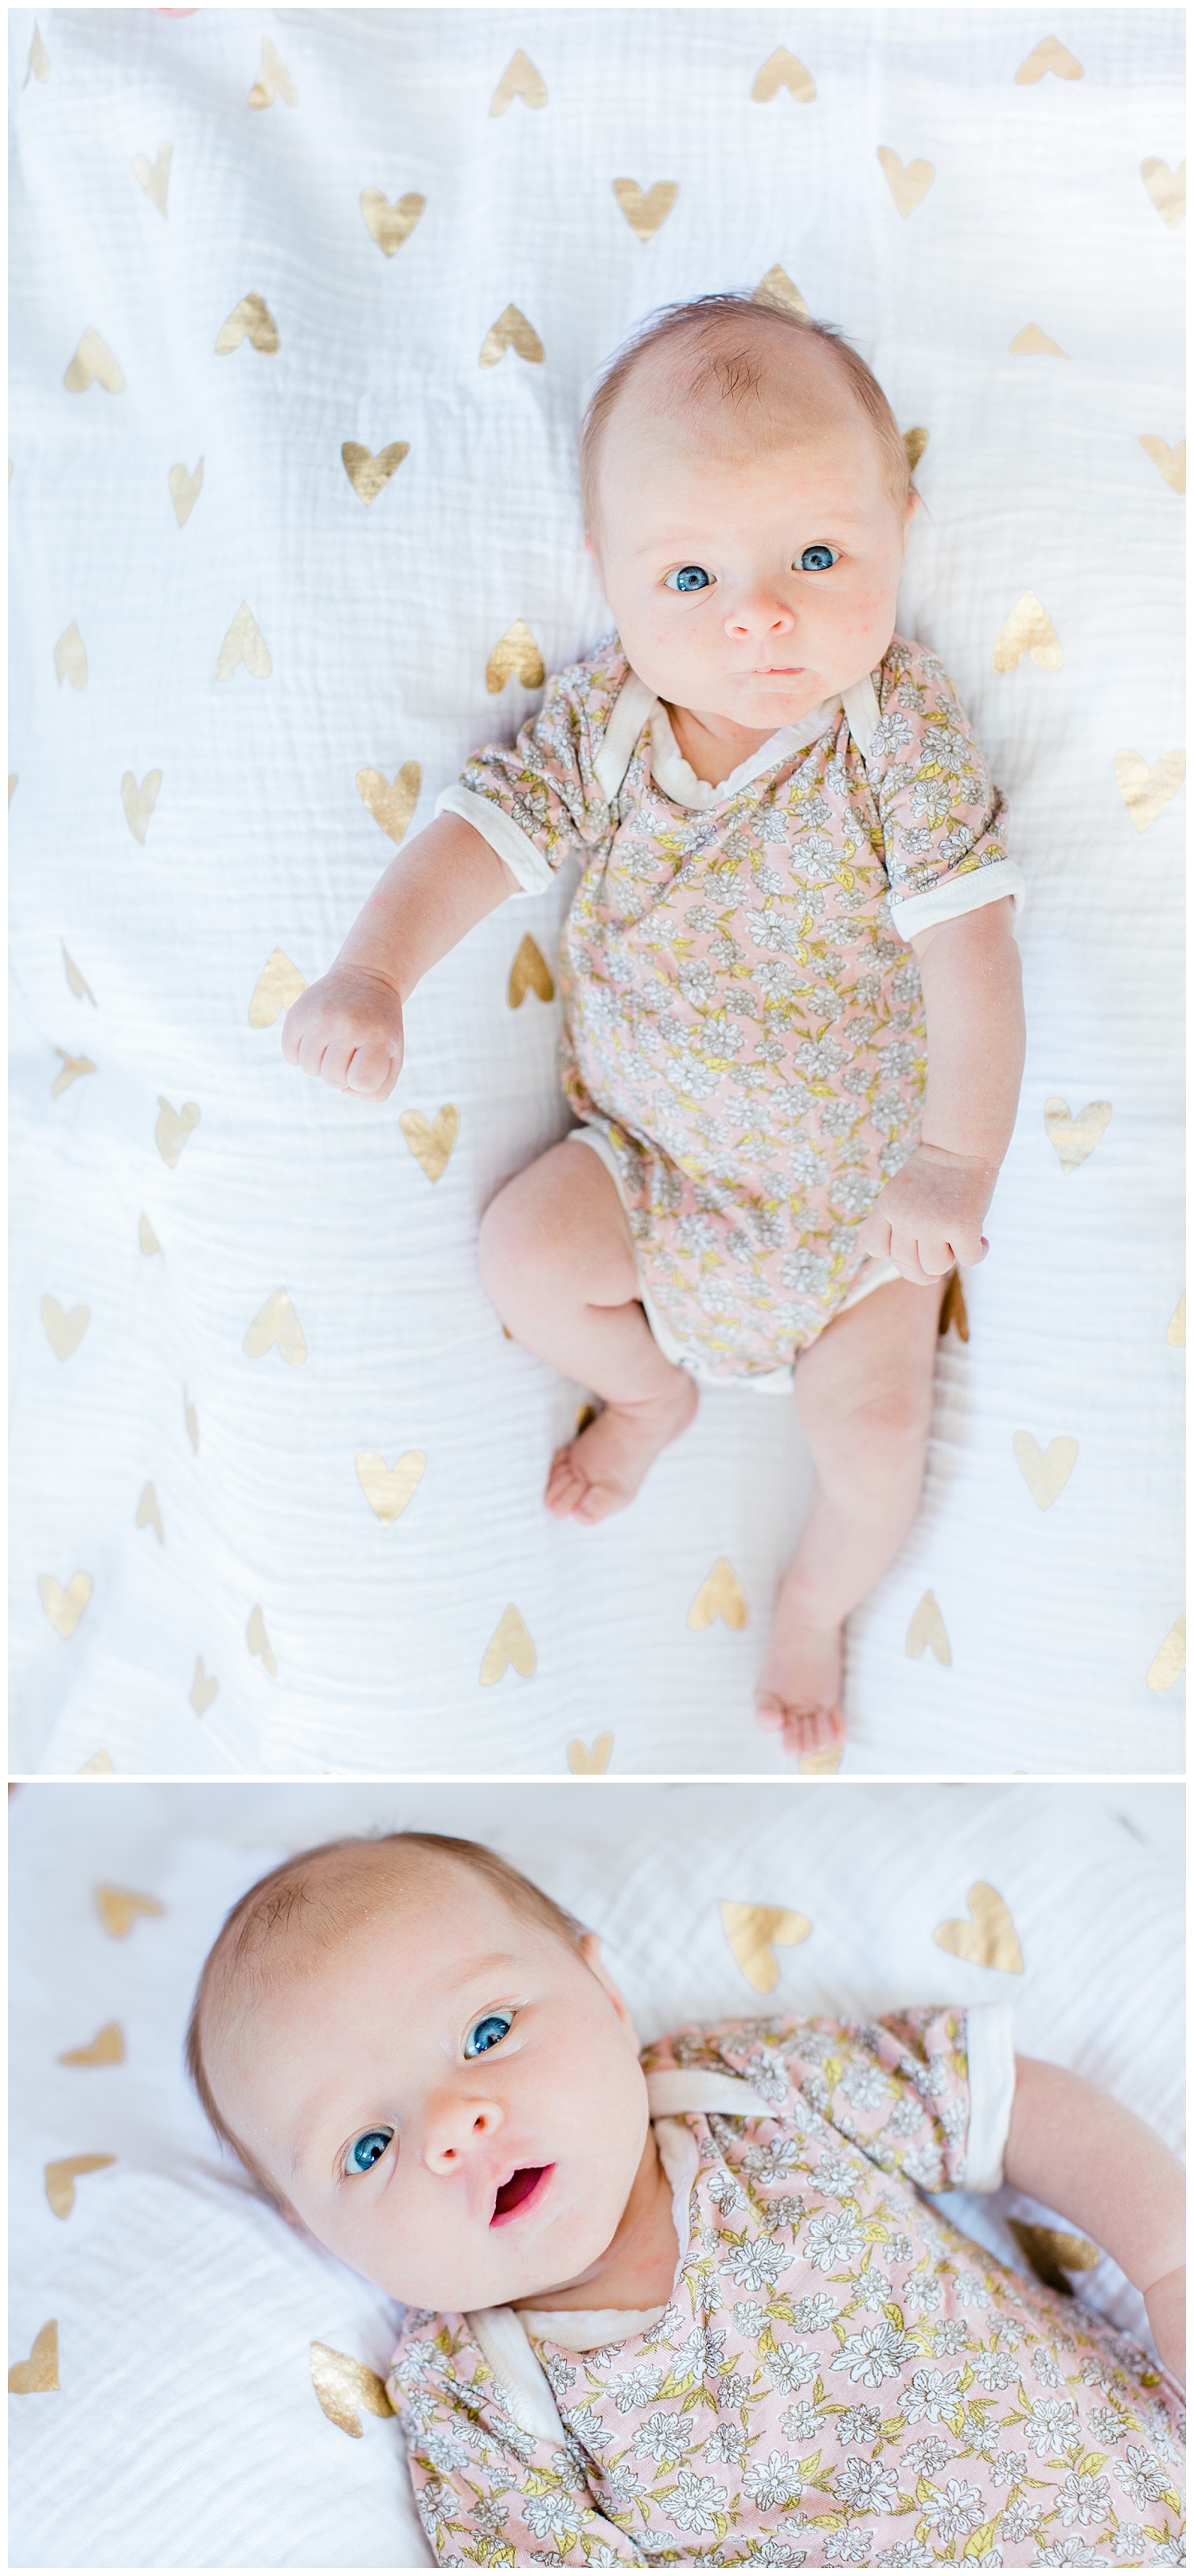 Baby at lifestyle newborn session, with Halie Olszowy (based in Portsmouth, NH).